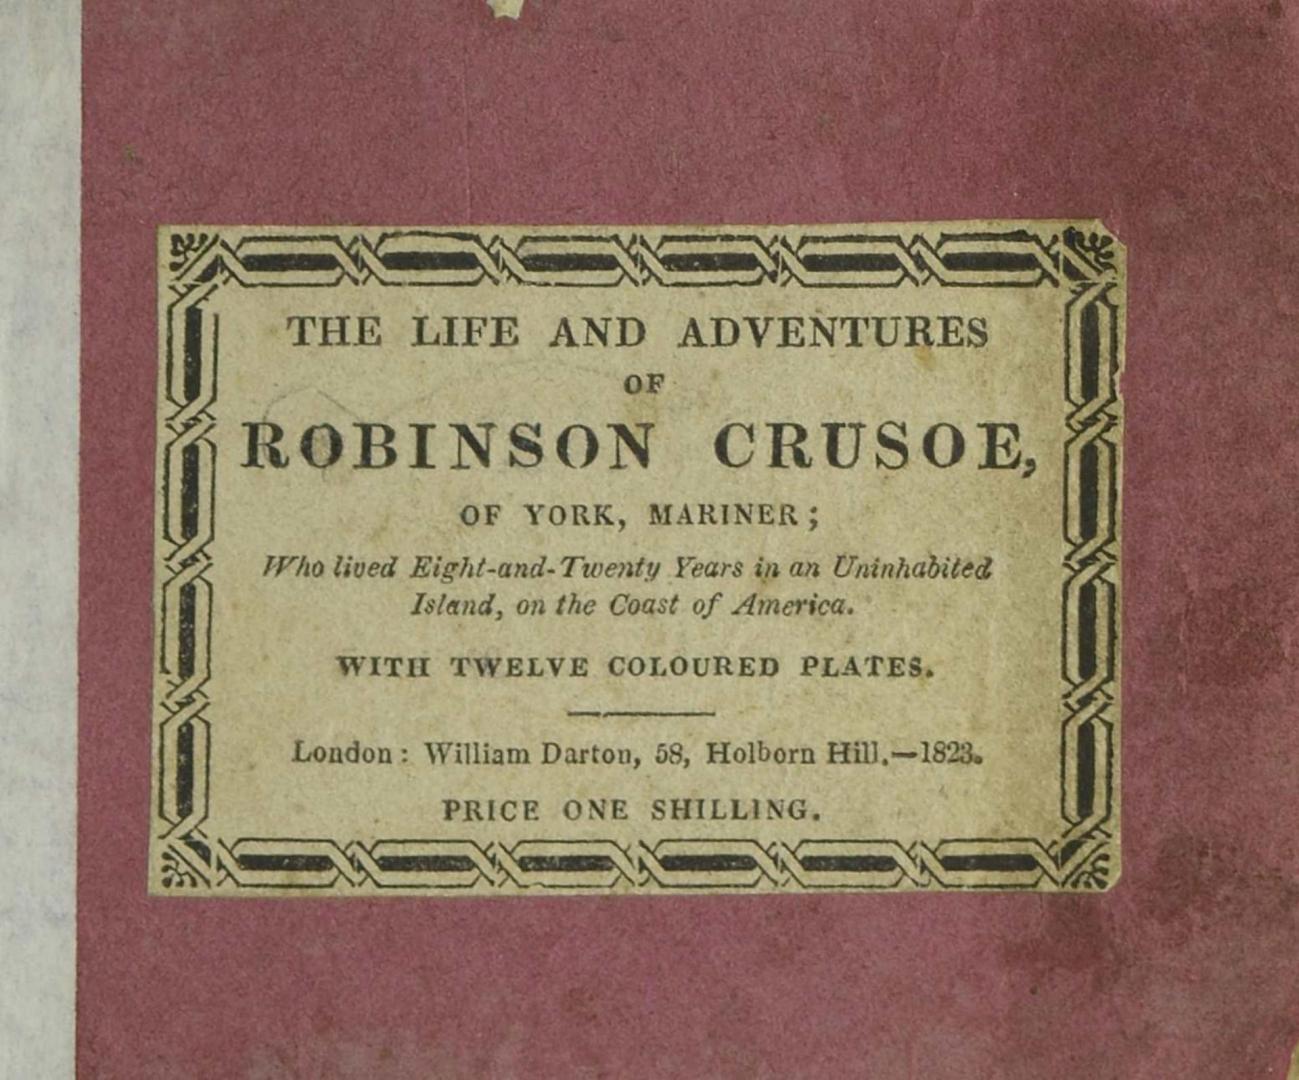 The life and adventures of Robinson Crusoe, of York, mariner : who lived eight-and-twenty years in an uninhabited island, on the coast of America